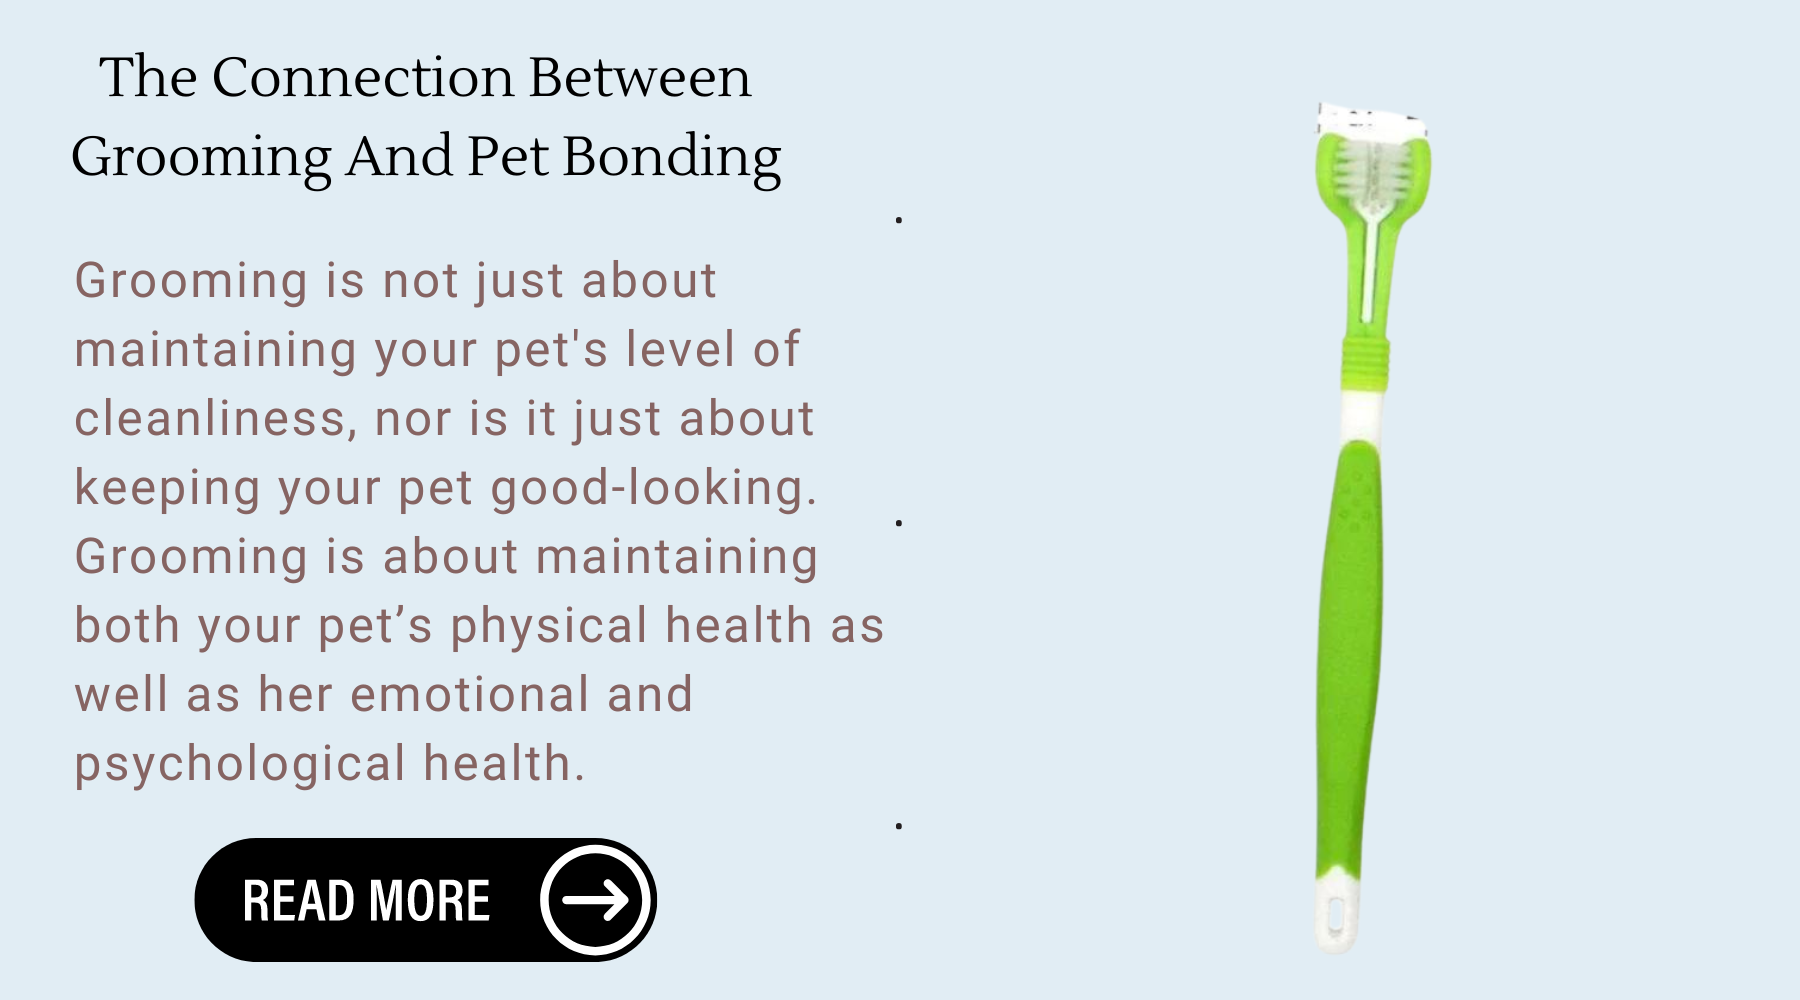 The Connection Between Grooming And Pet Bonding